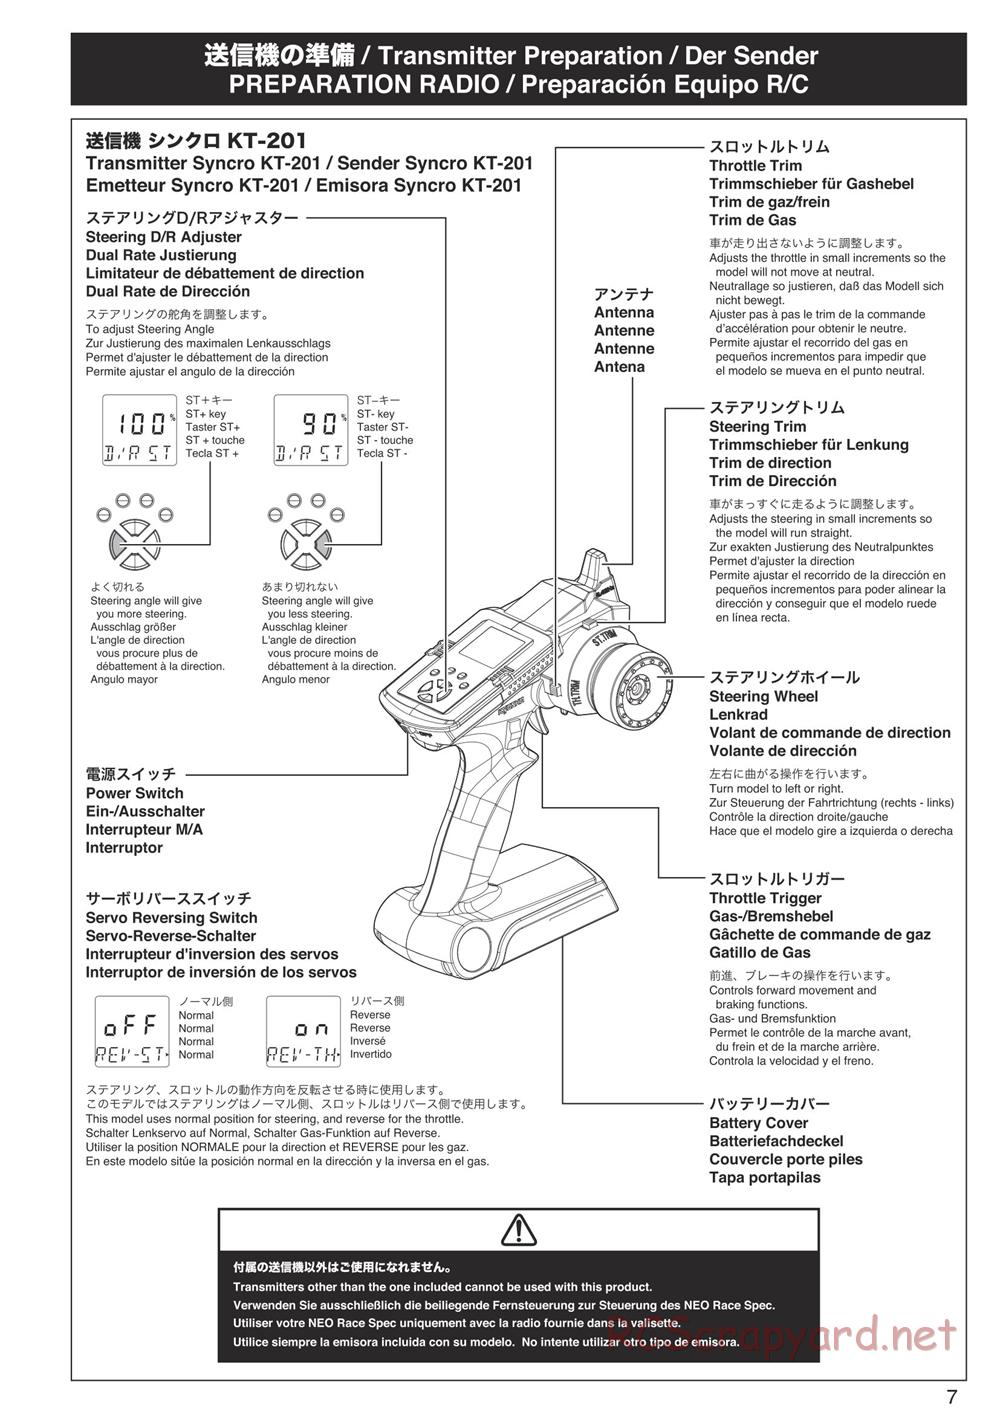 Kyosho - Inferno Neo Race Spec - Manual - Page 7